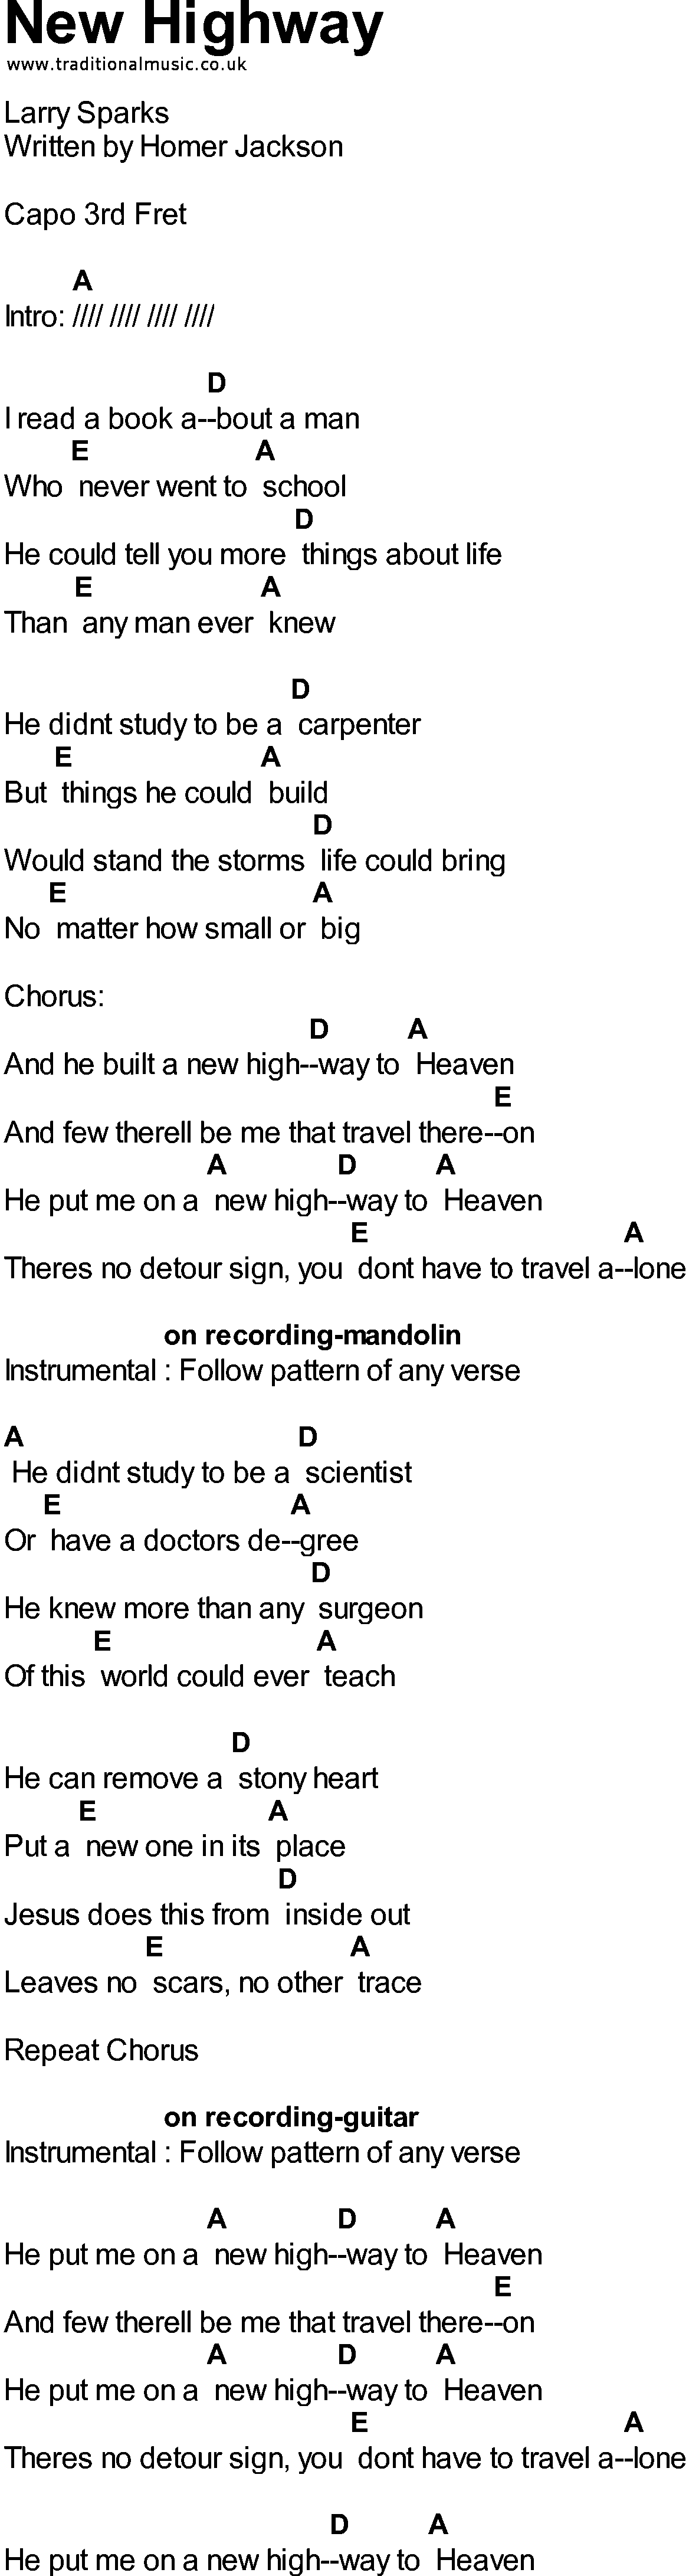 Bluegrass songs with chords - New Highway